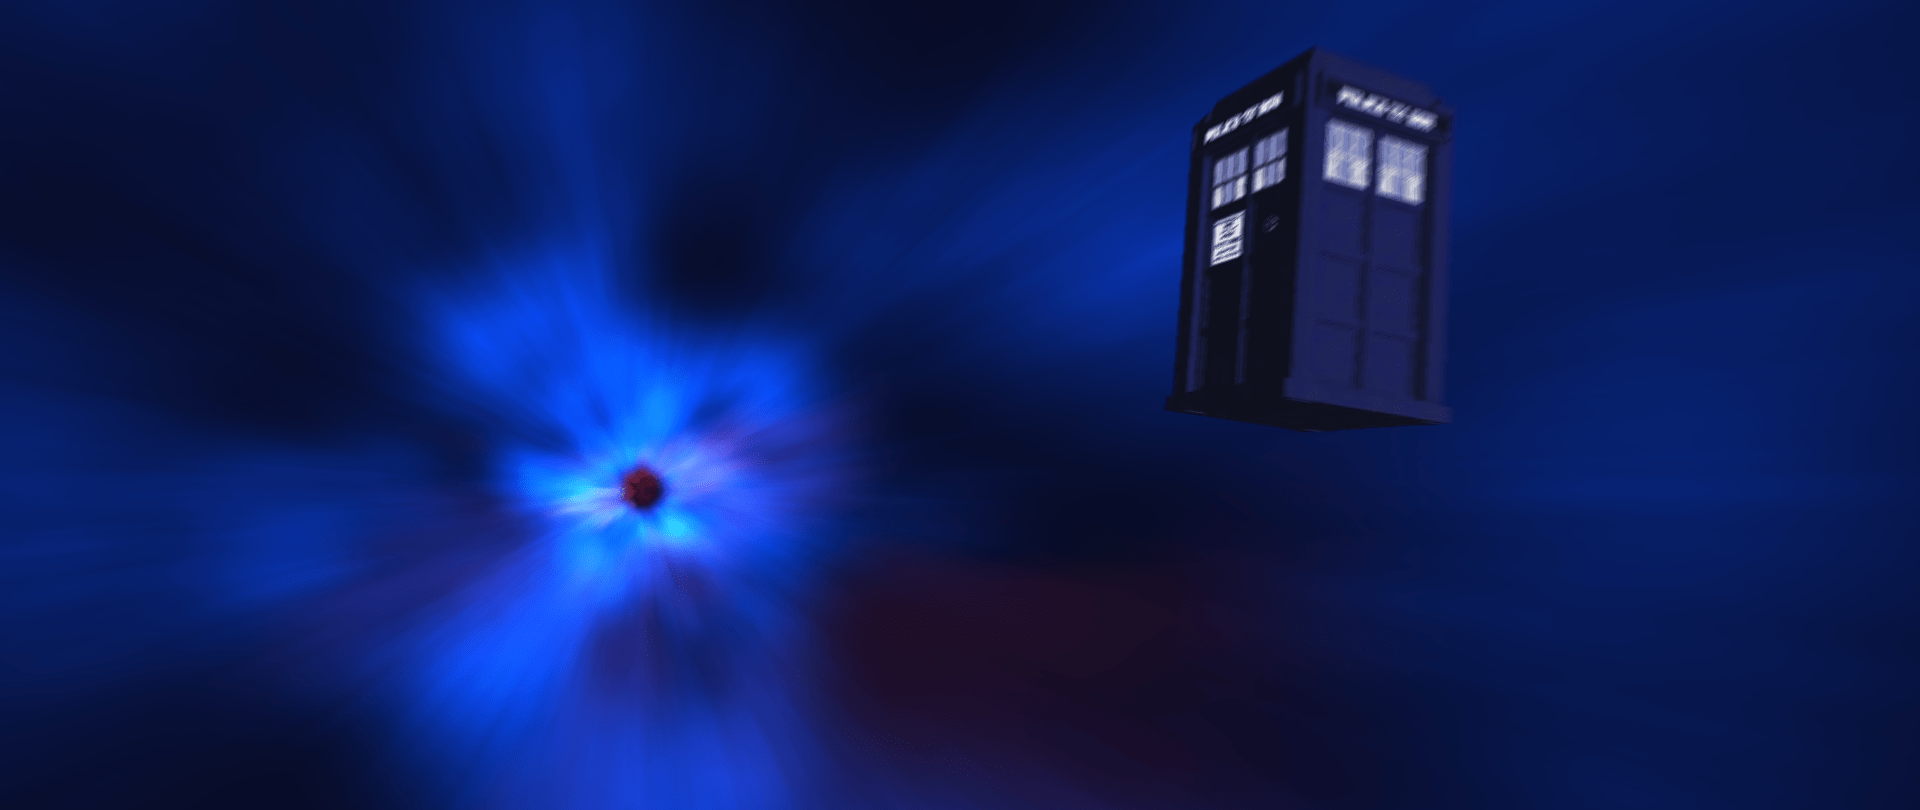 Doctor Who Time Vortex Wallpapers Top Free Doctor Who Time Vortex Backgrounds Wallpaperaccess